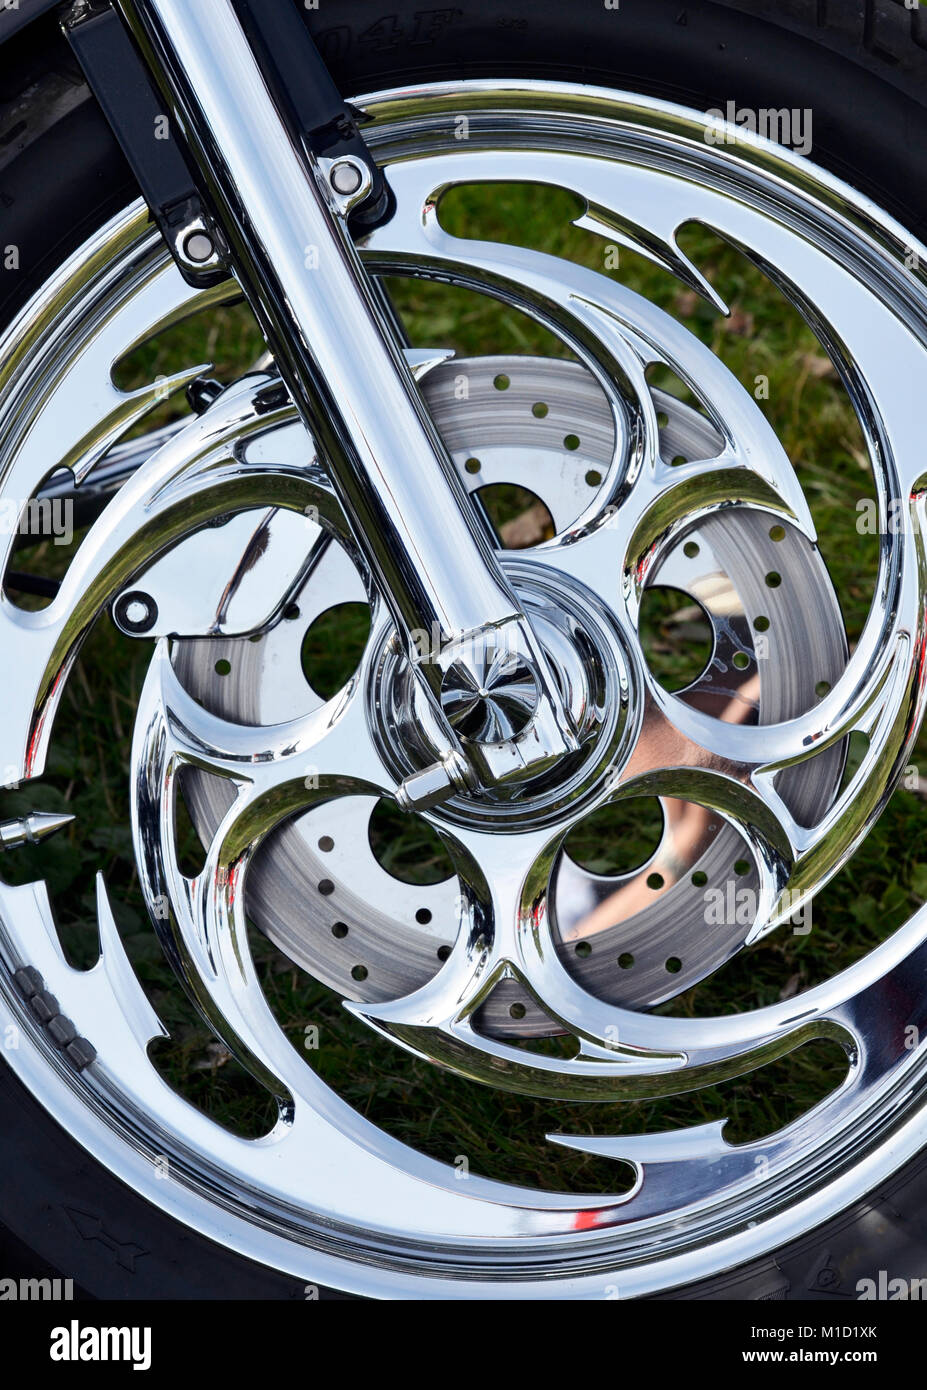 Harley Davidson Front Wheel High Resolution Stock Photography And Images Alamy